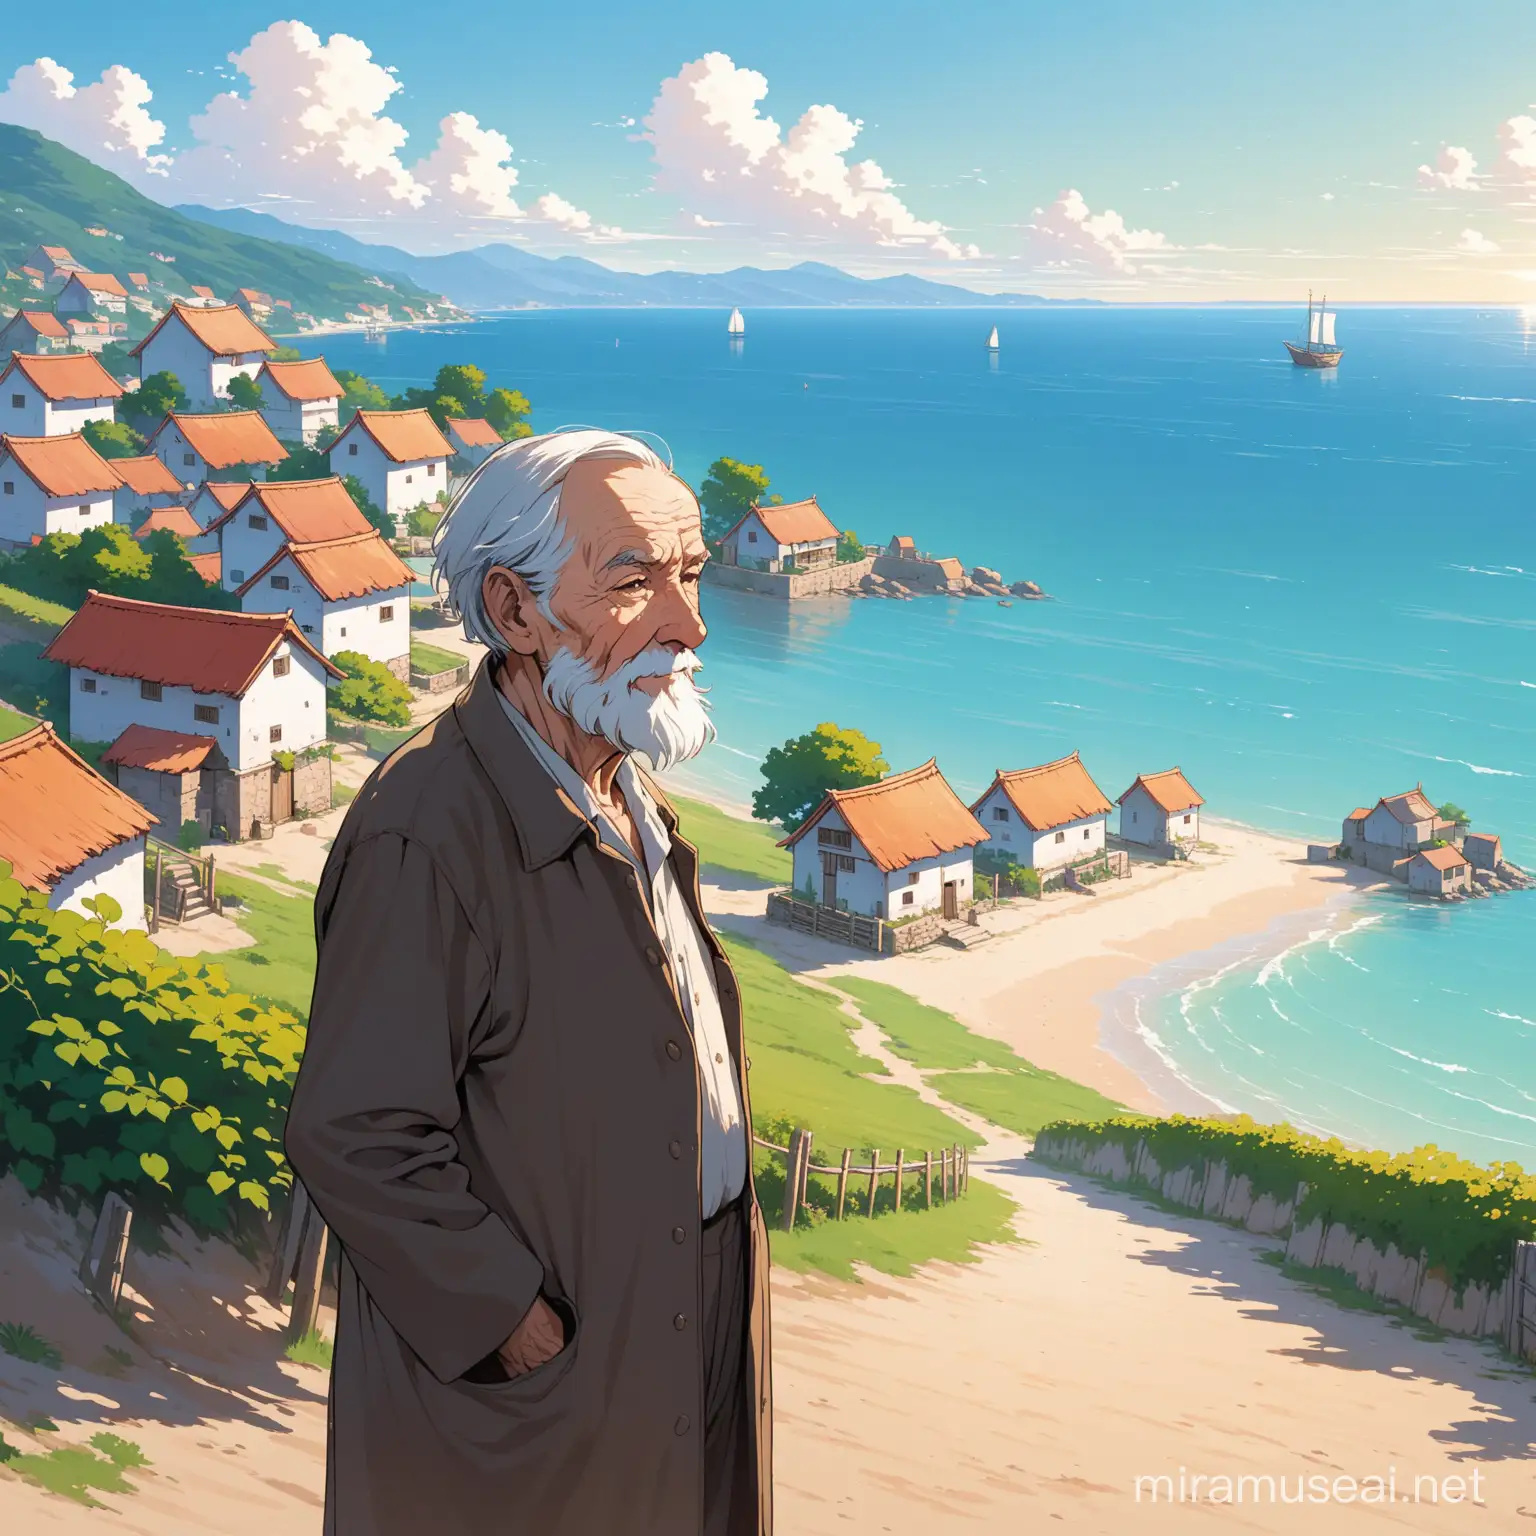 Old man by a village by the sea
